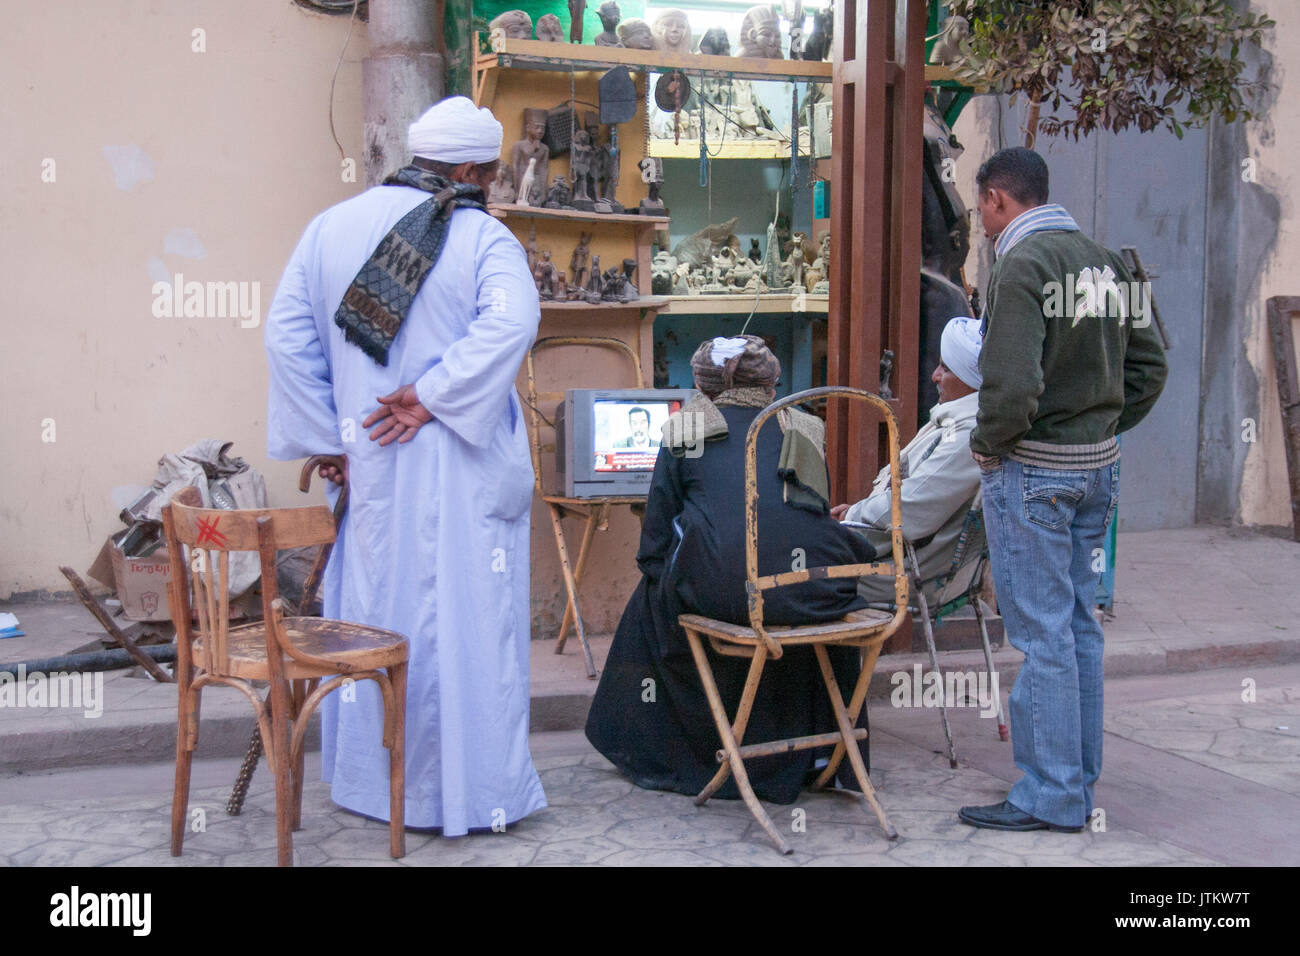 Luxor, Egypt - December 30, 2006: People on the street watching on TV the execution of Saddam Hussein. Stock Photo